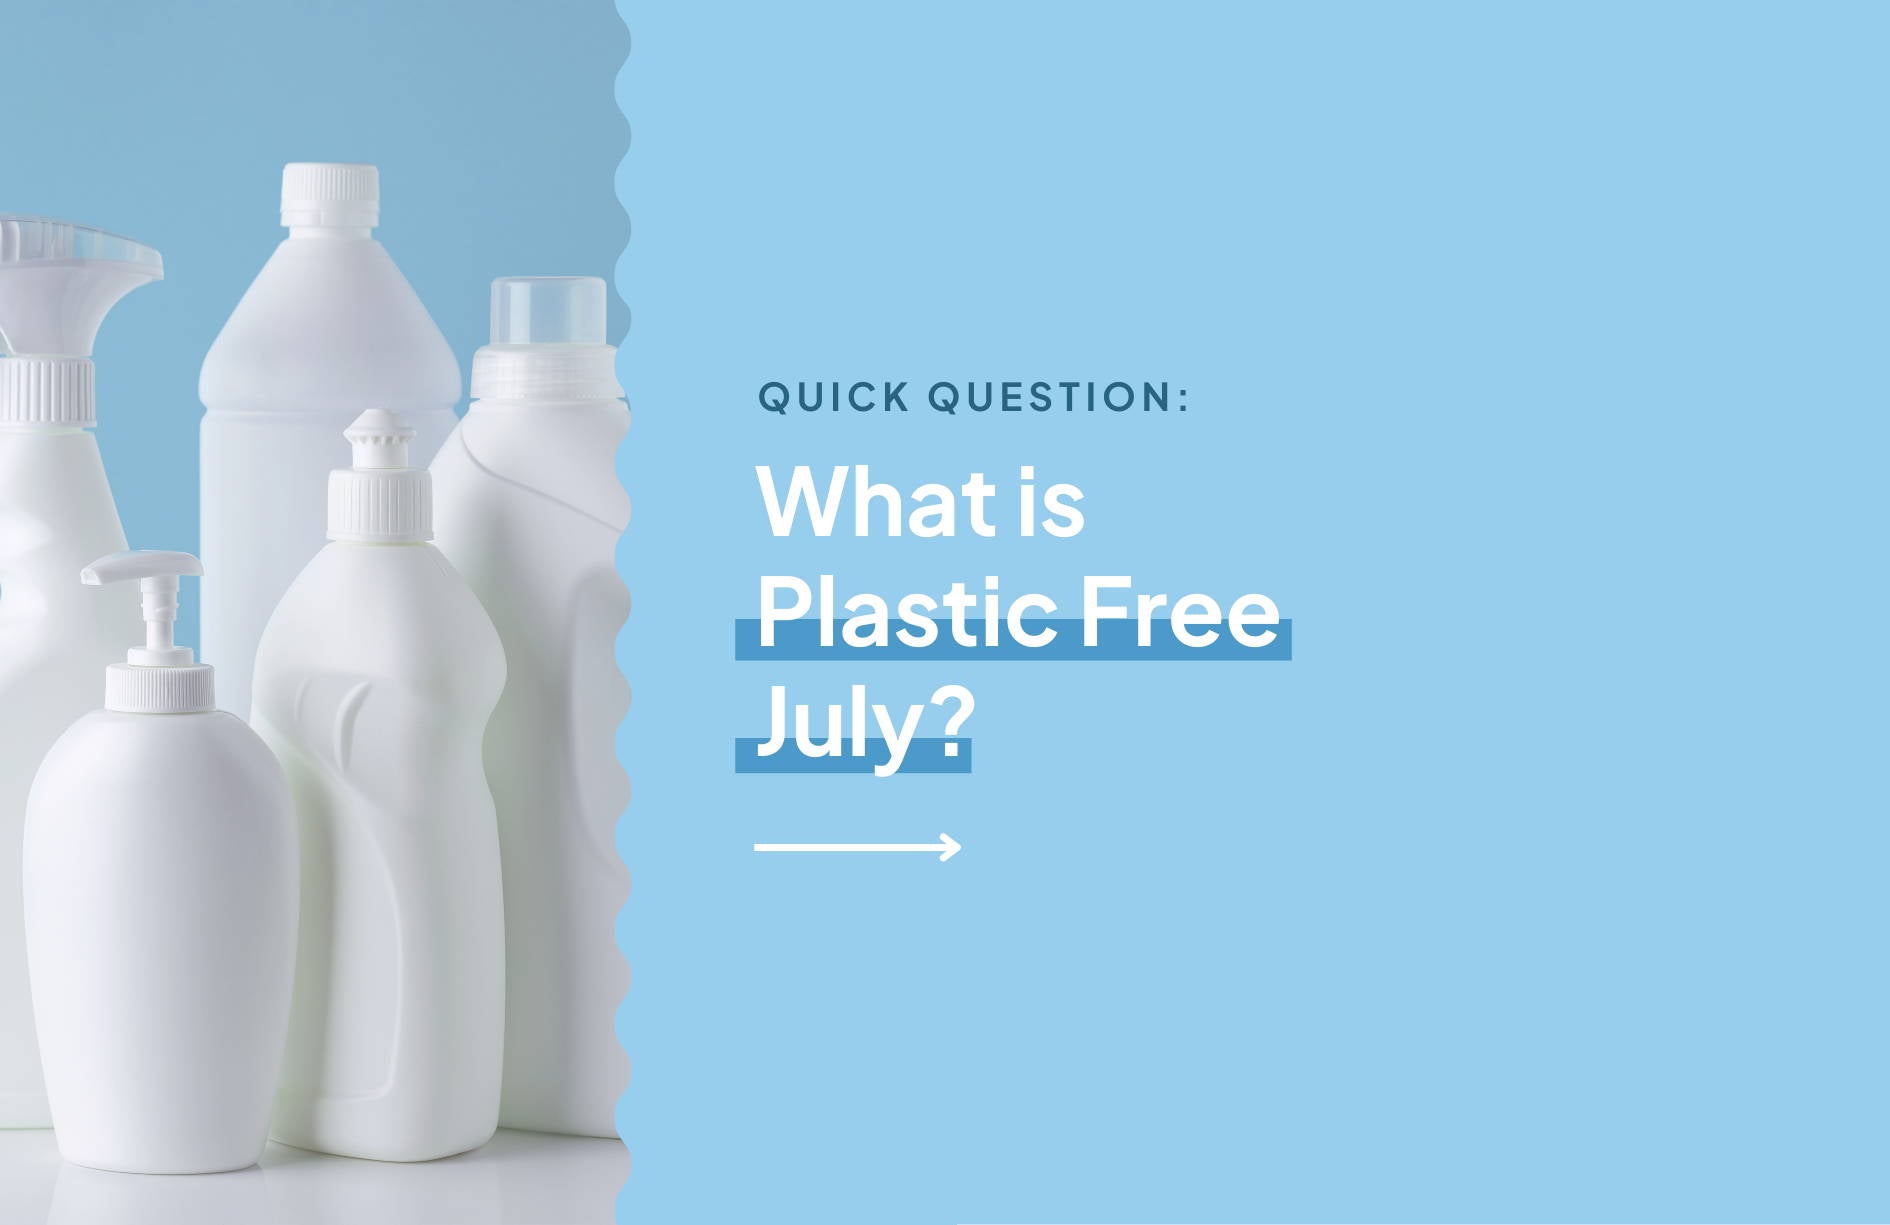 What is Plastic Free July?